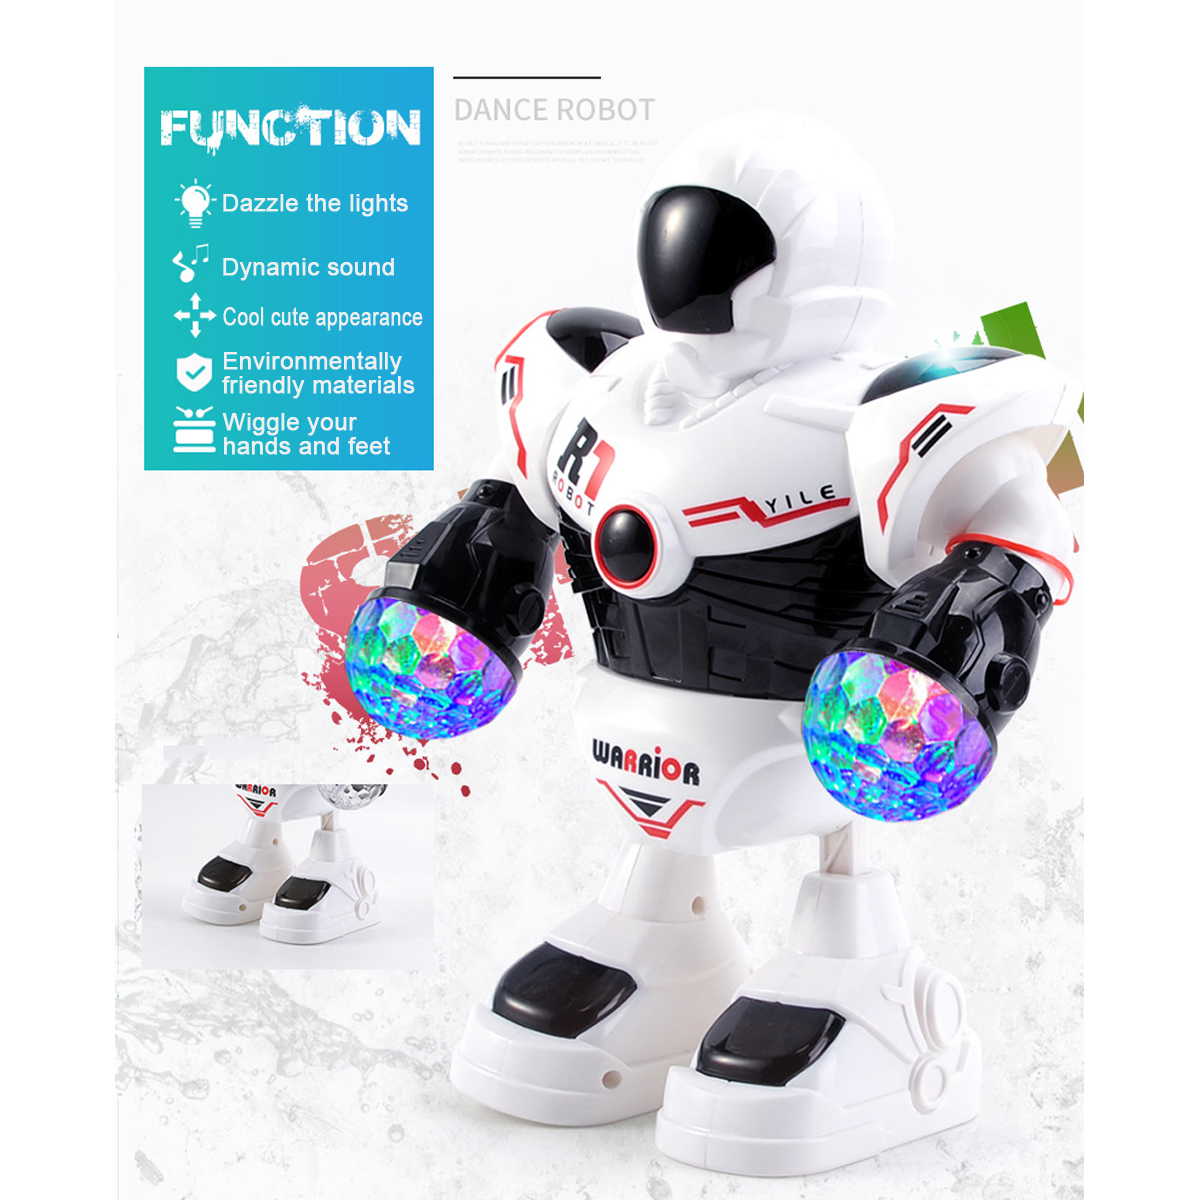 Space-Police-Electric-Dancing-Robot-Childrens-Toy-Christmas-Gift-1788661-5